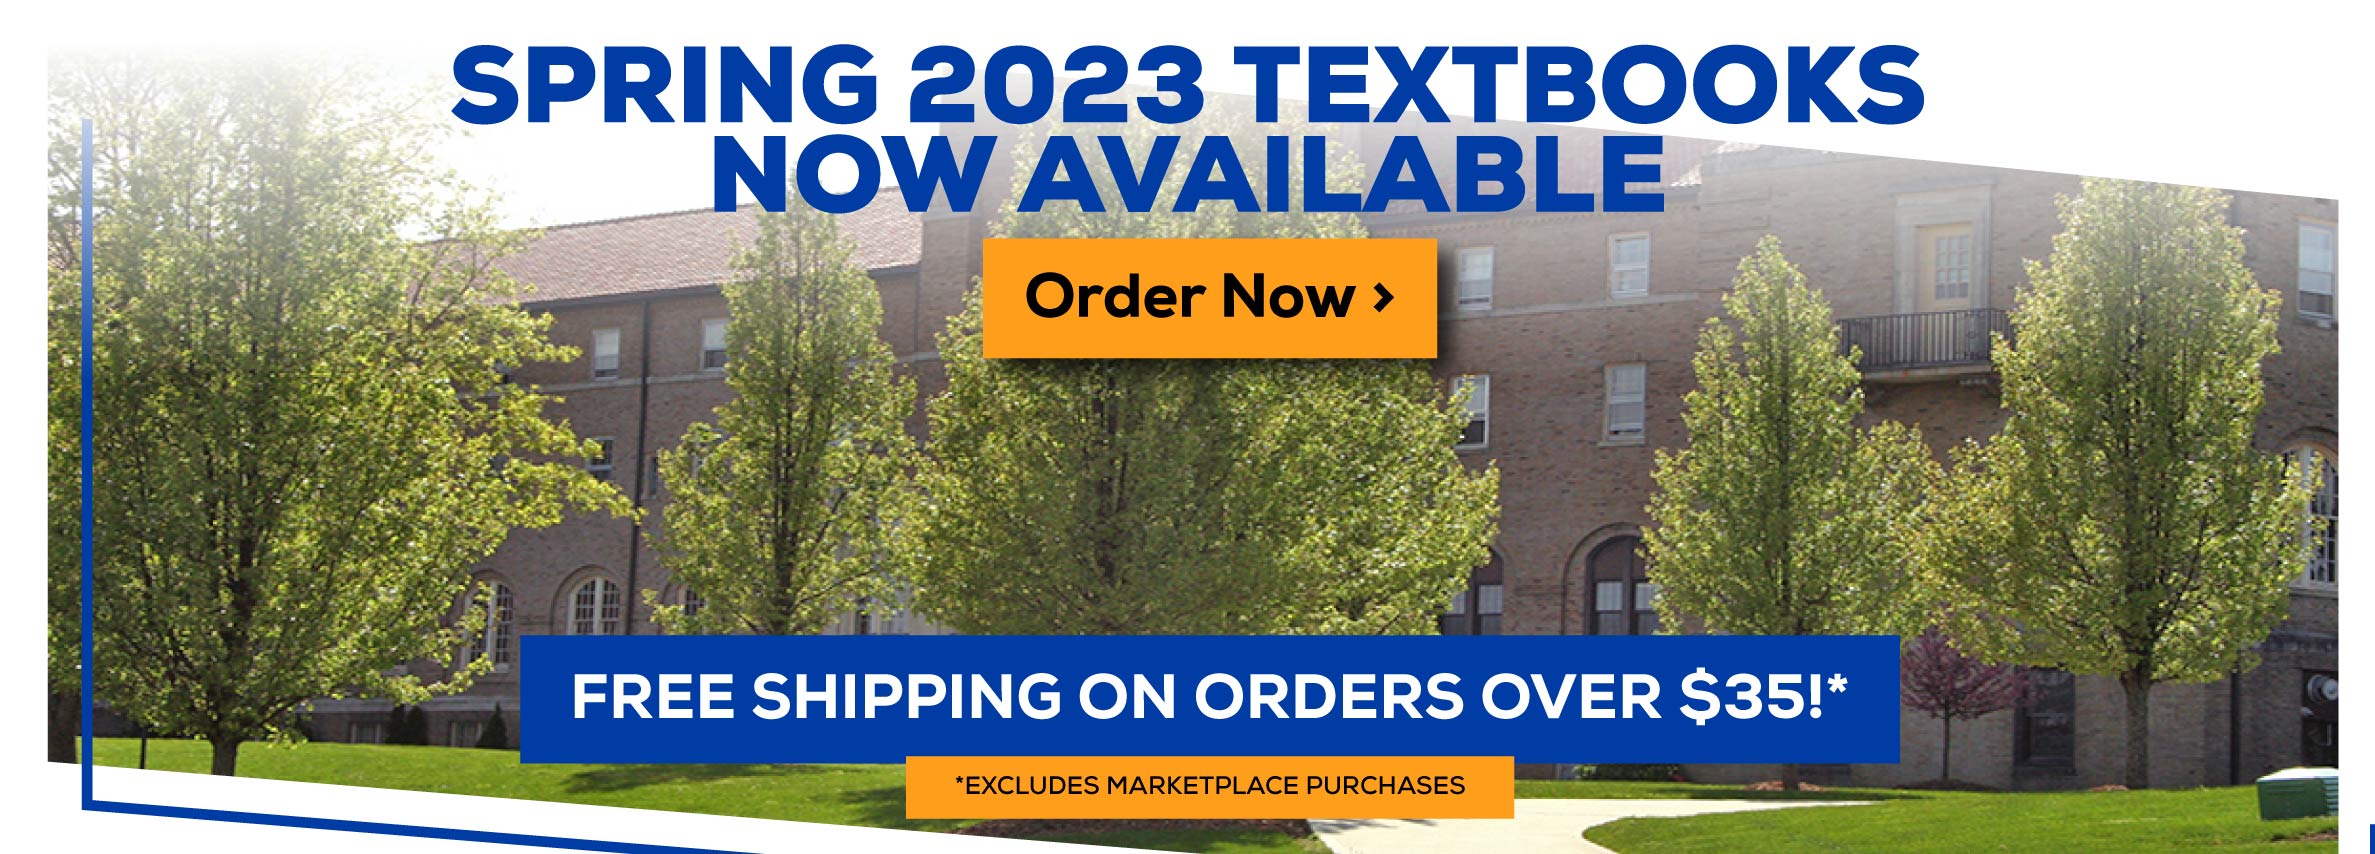 Spring 2023 Textbooks Now Available Order Now - Free Shipping on Orders Over $35!* Excludes Marketplace Purchases